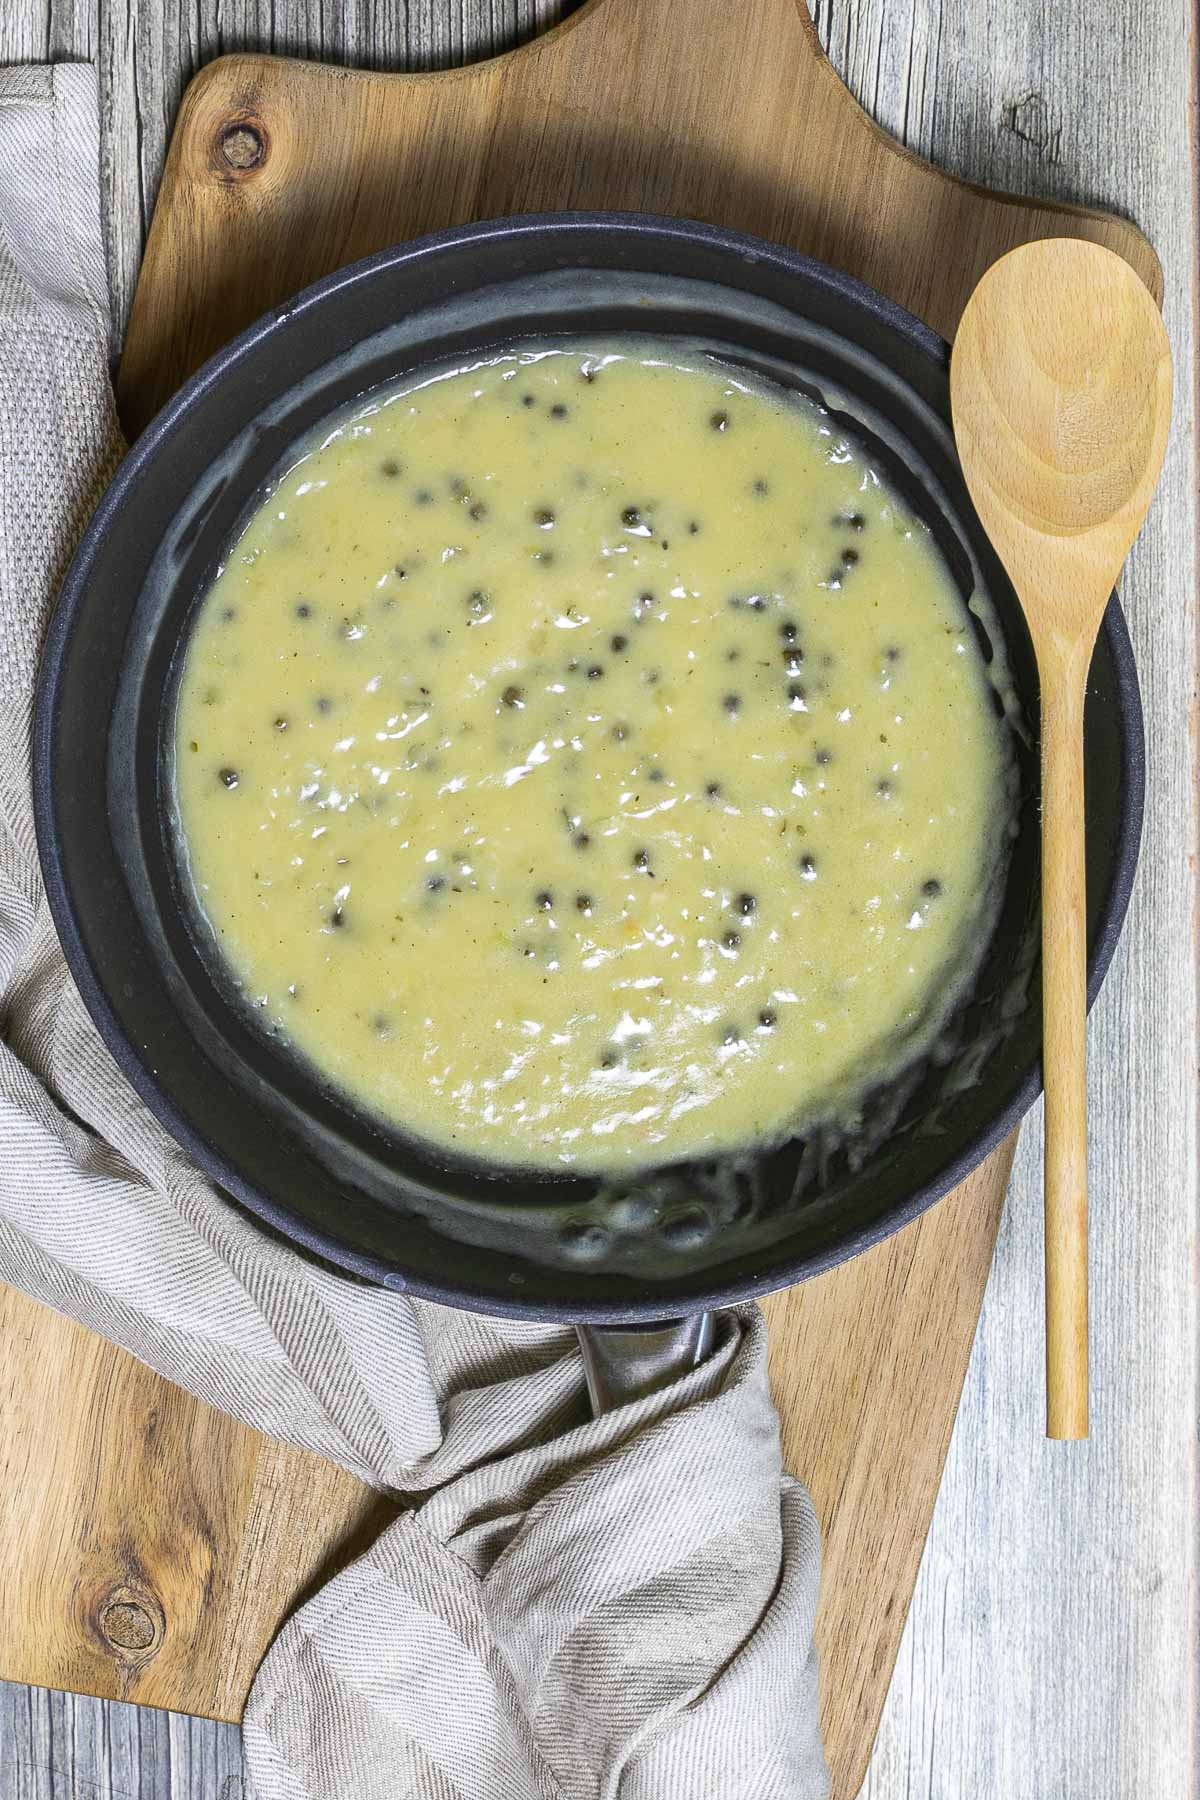 Black frying pan with a light green sauce with whole peppercorns. A wooden spoon is placed next to it. 